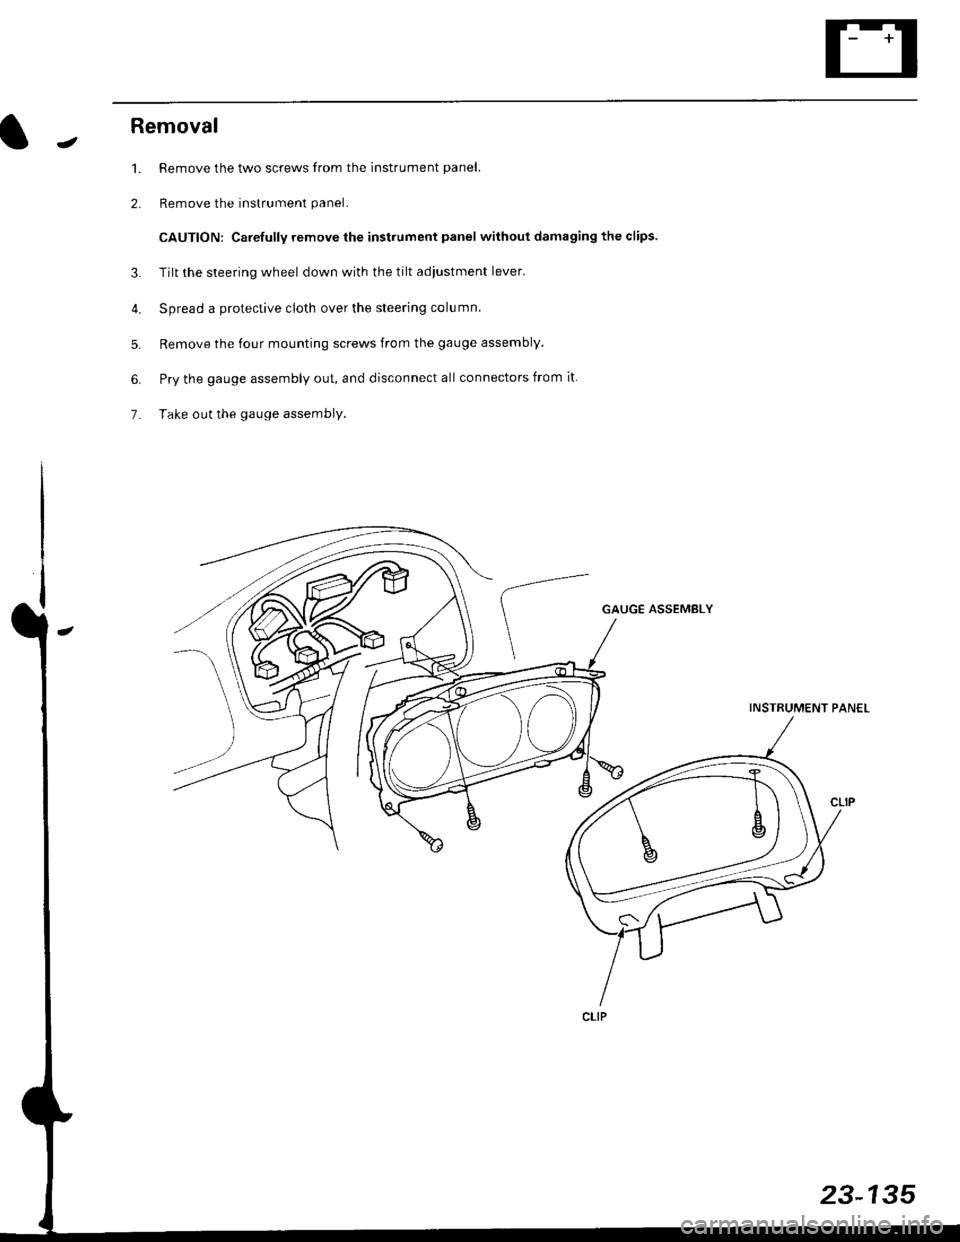 HONDA CIVIC 1997 6.G Owners Guide JRemoval
1. Remove the two screws from the instrument panel.
2. Remove the instrument panel.
CAUTION: Carefully remove the instrument panel without damaging the clips.
3. Tilt the steering wheel down 